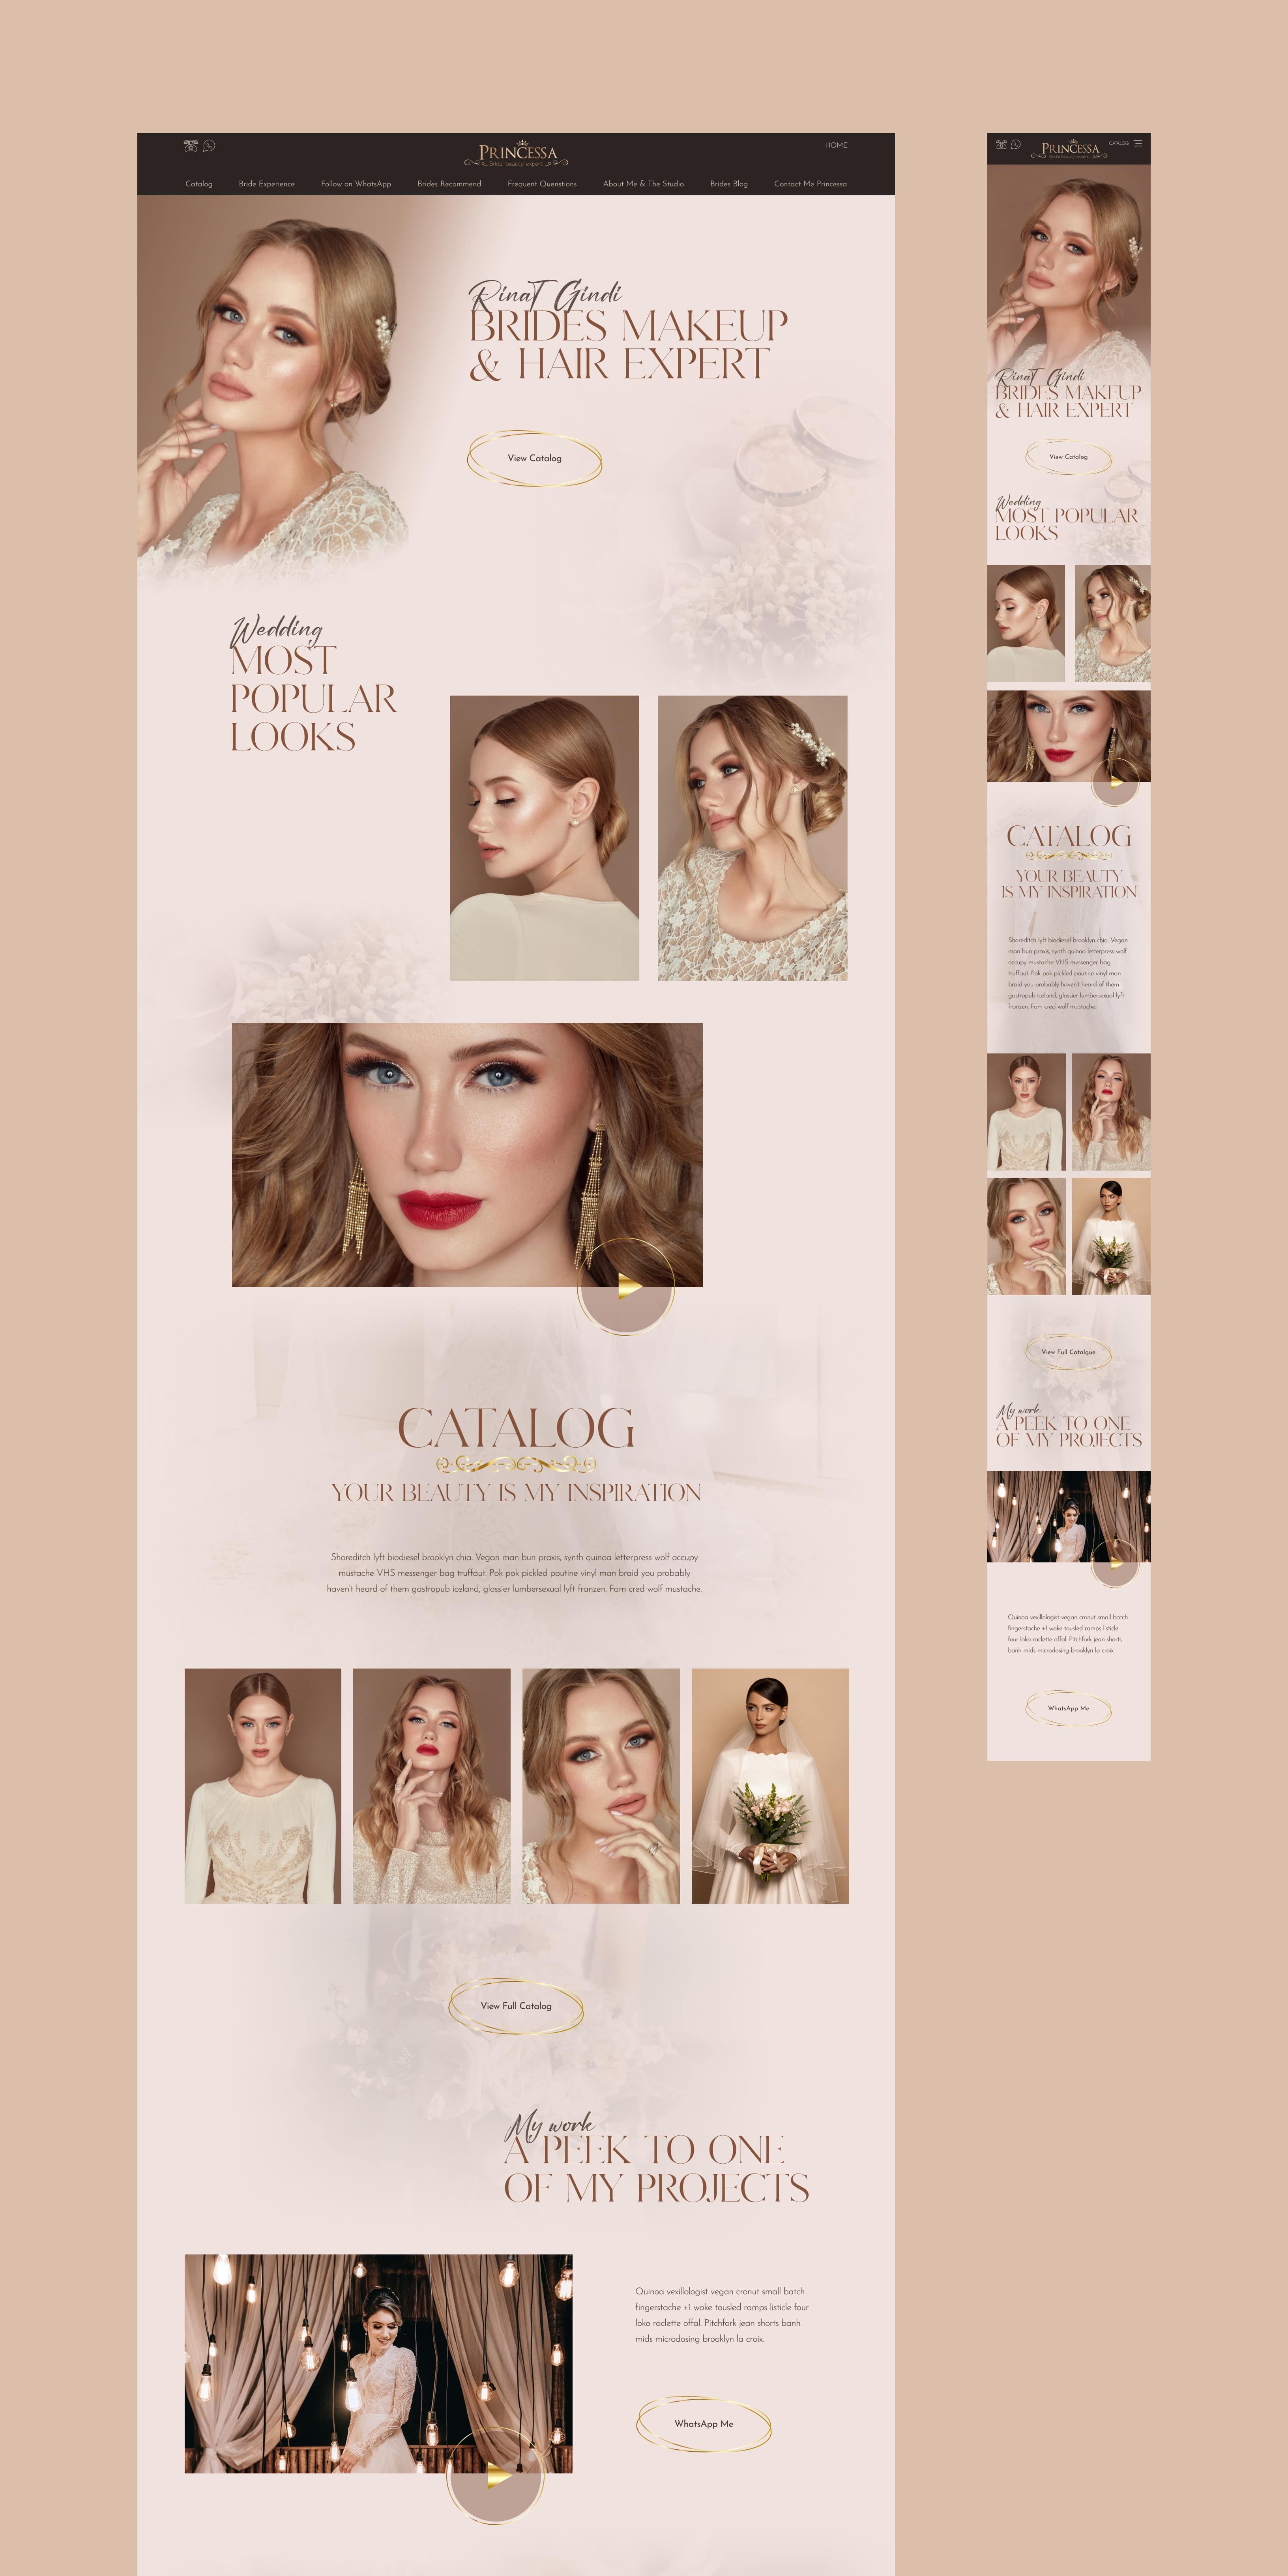 Wedding Makeup & Hair Artist resposnive landing page view for sections: banner, lookbook, catalog, my work